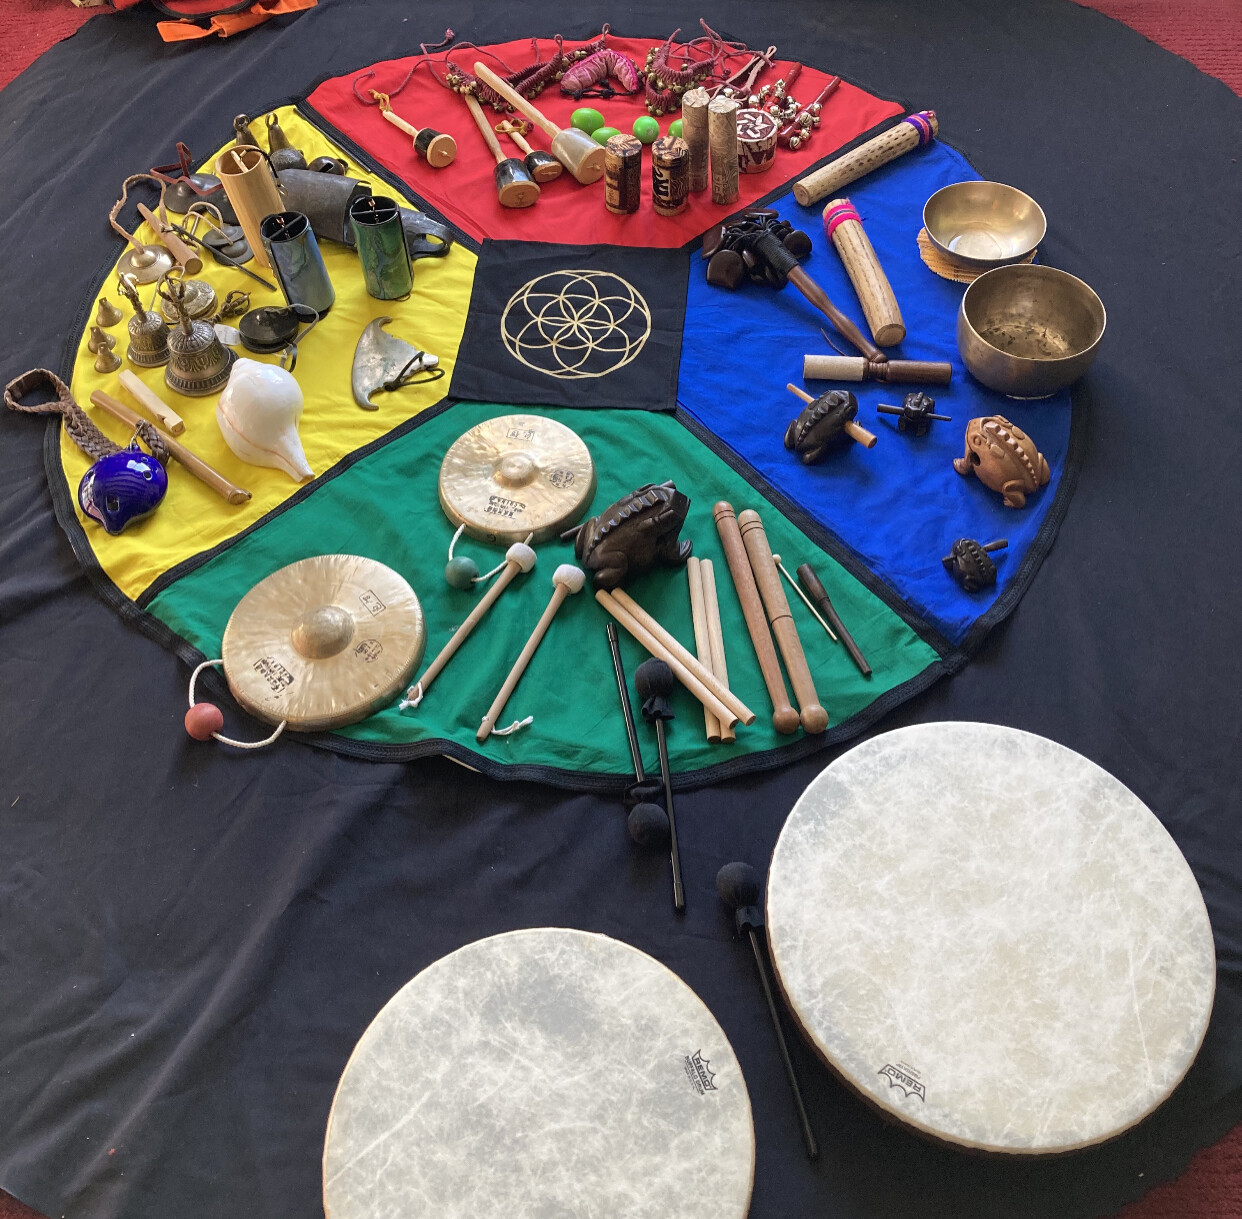 FEBRUARY 26-27 2022
GONG PLAY! LIVE WEEKEND TRAINING/RETREAT with Don Conreaux, Michael Enderle and Yaelle E. Shaphir ALL LEVELS WELCOME - From the Stone and Bronze Age into the New Aquarian Age